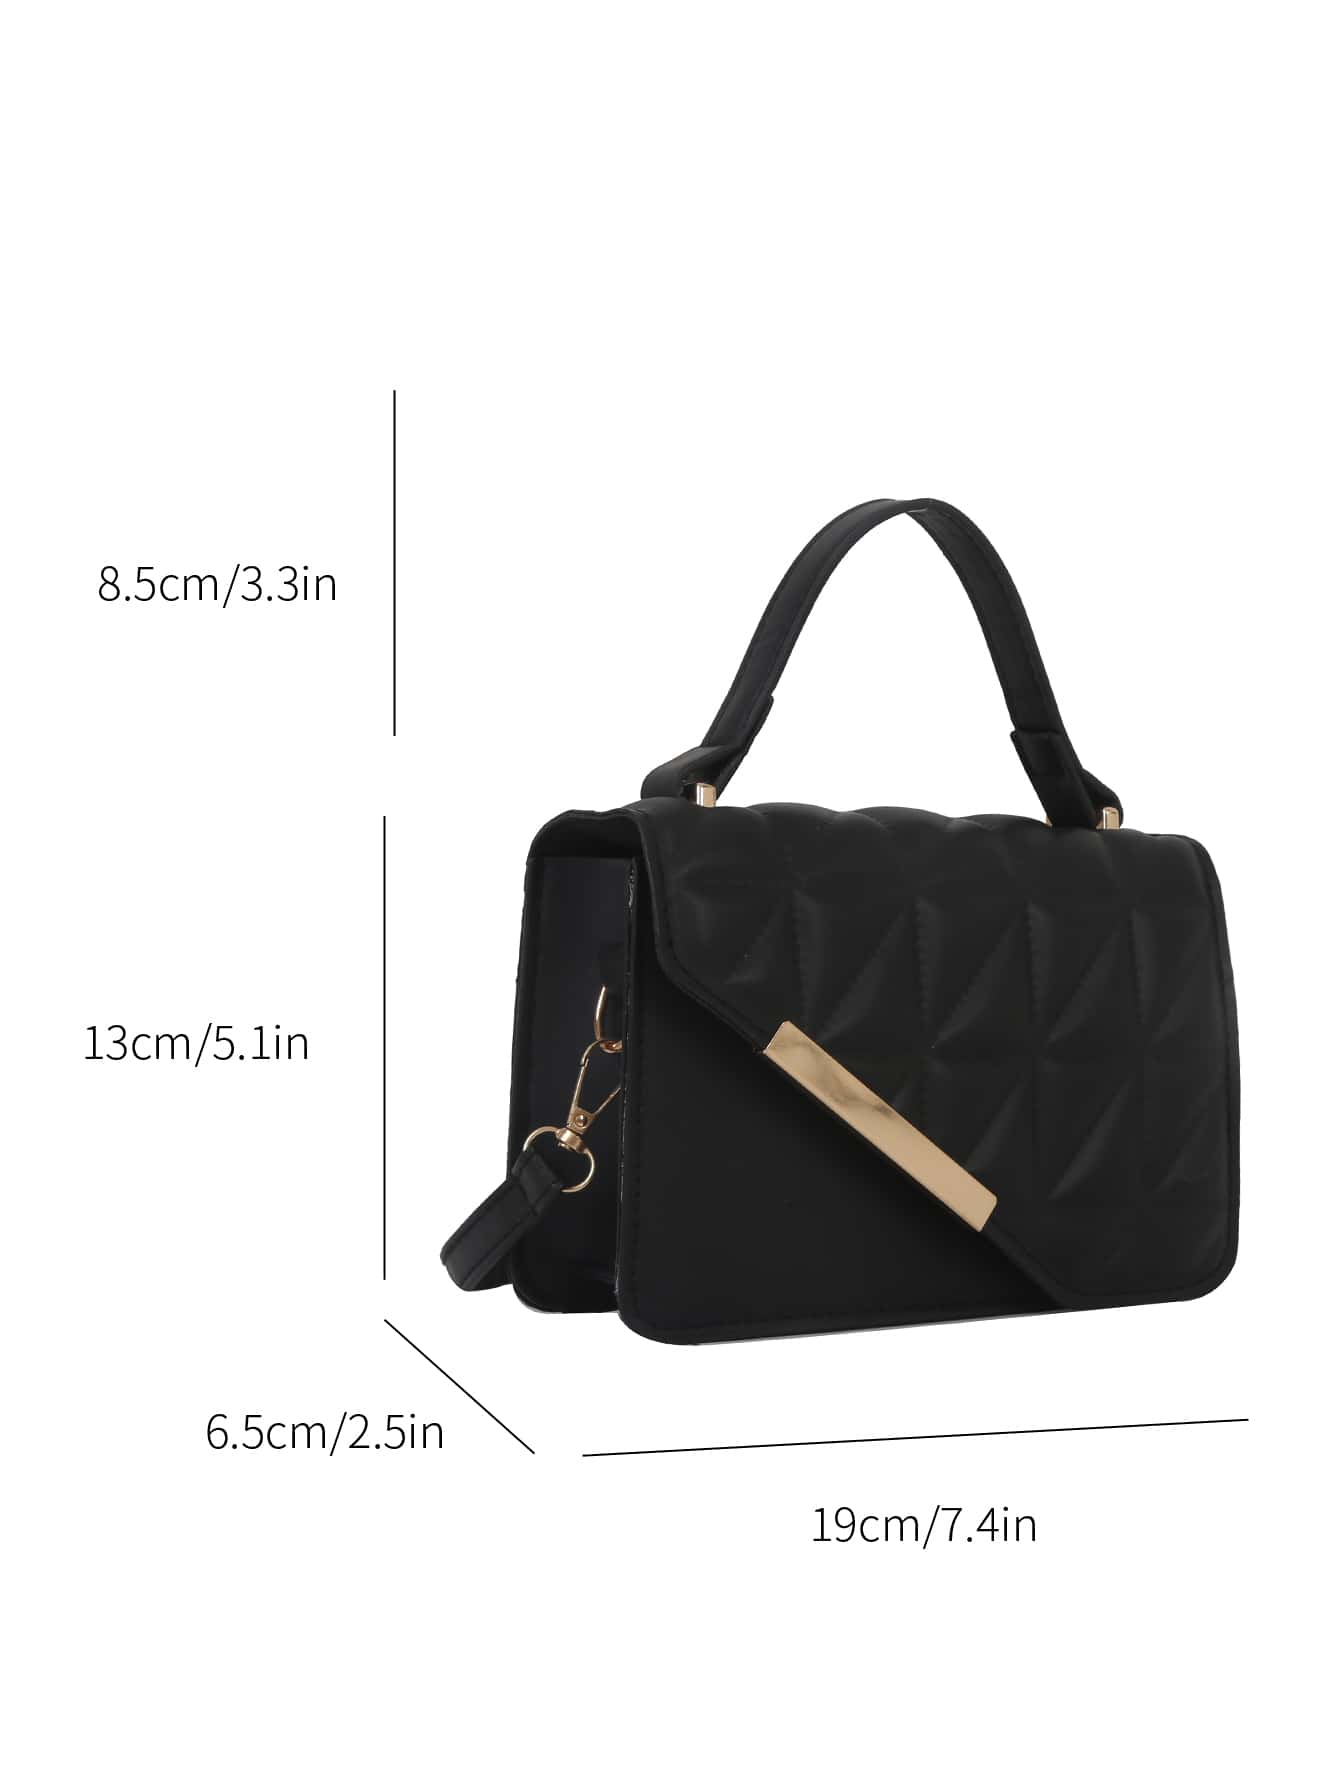 Elegant Portable Mini Stylish Flap Top Handle Bag With Adjustable Shoulder Strap For Female,For Lady Best Personalized Gifts For Women, Mom & Girlfriends - Negative Apparel